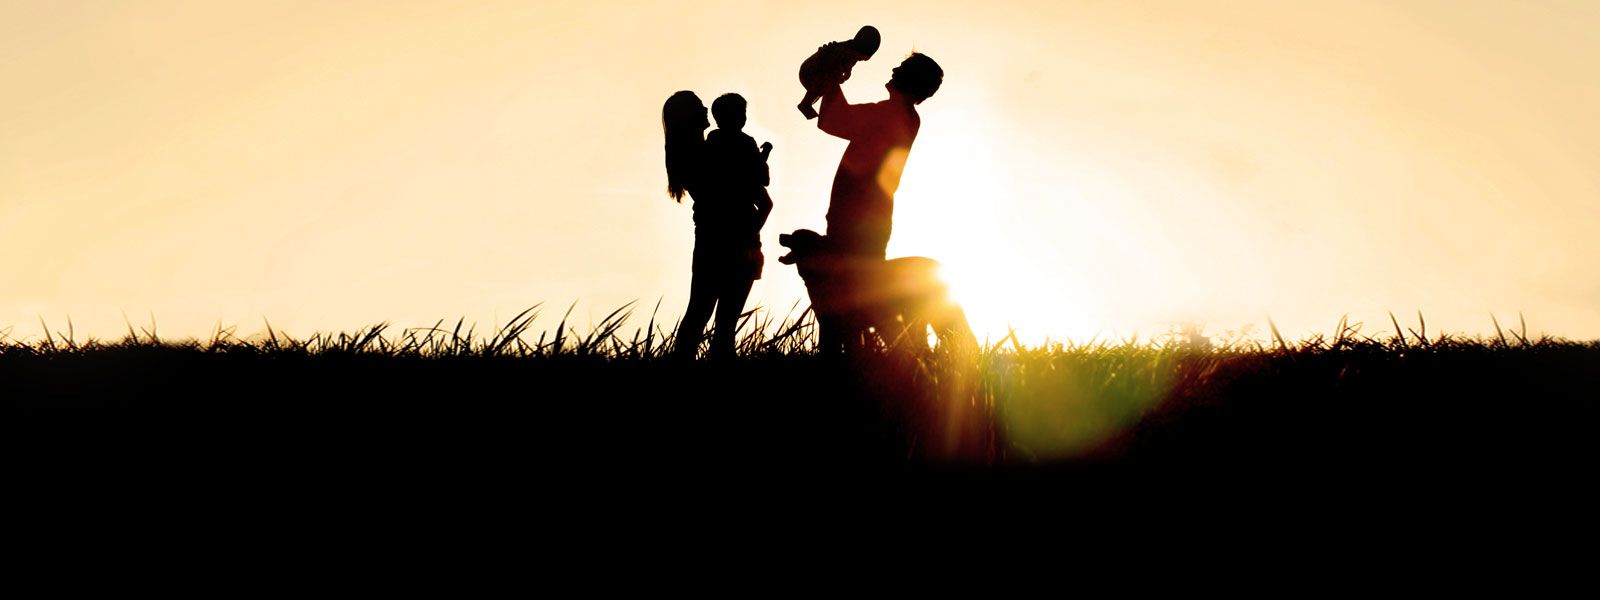 Silhouette of family in a field at sunrise.